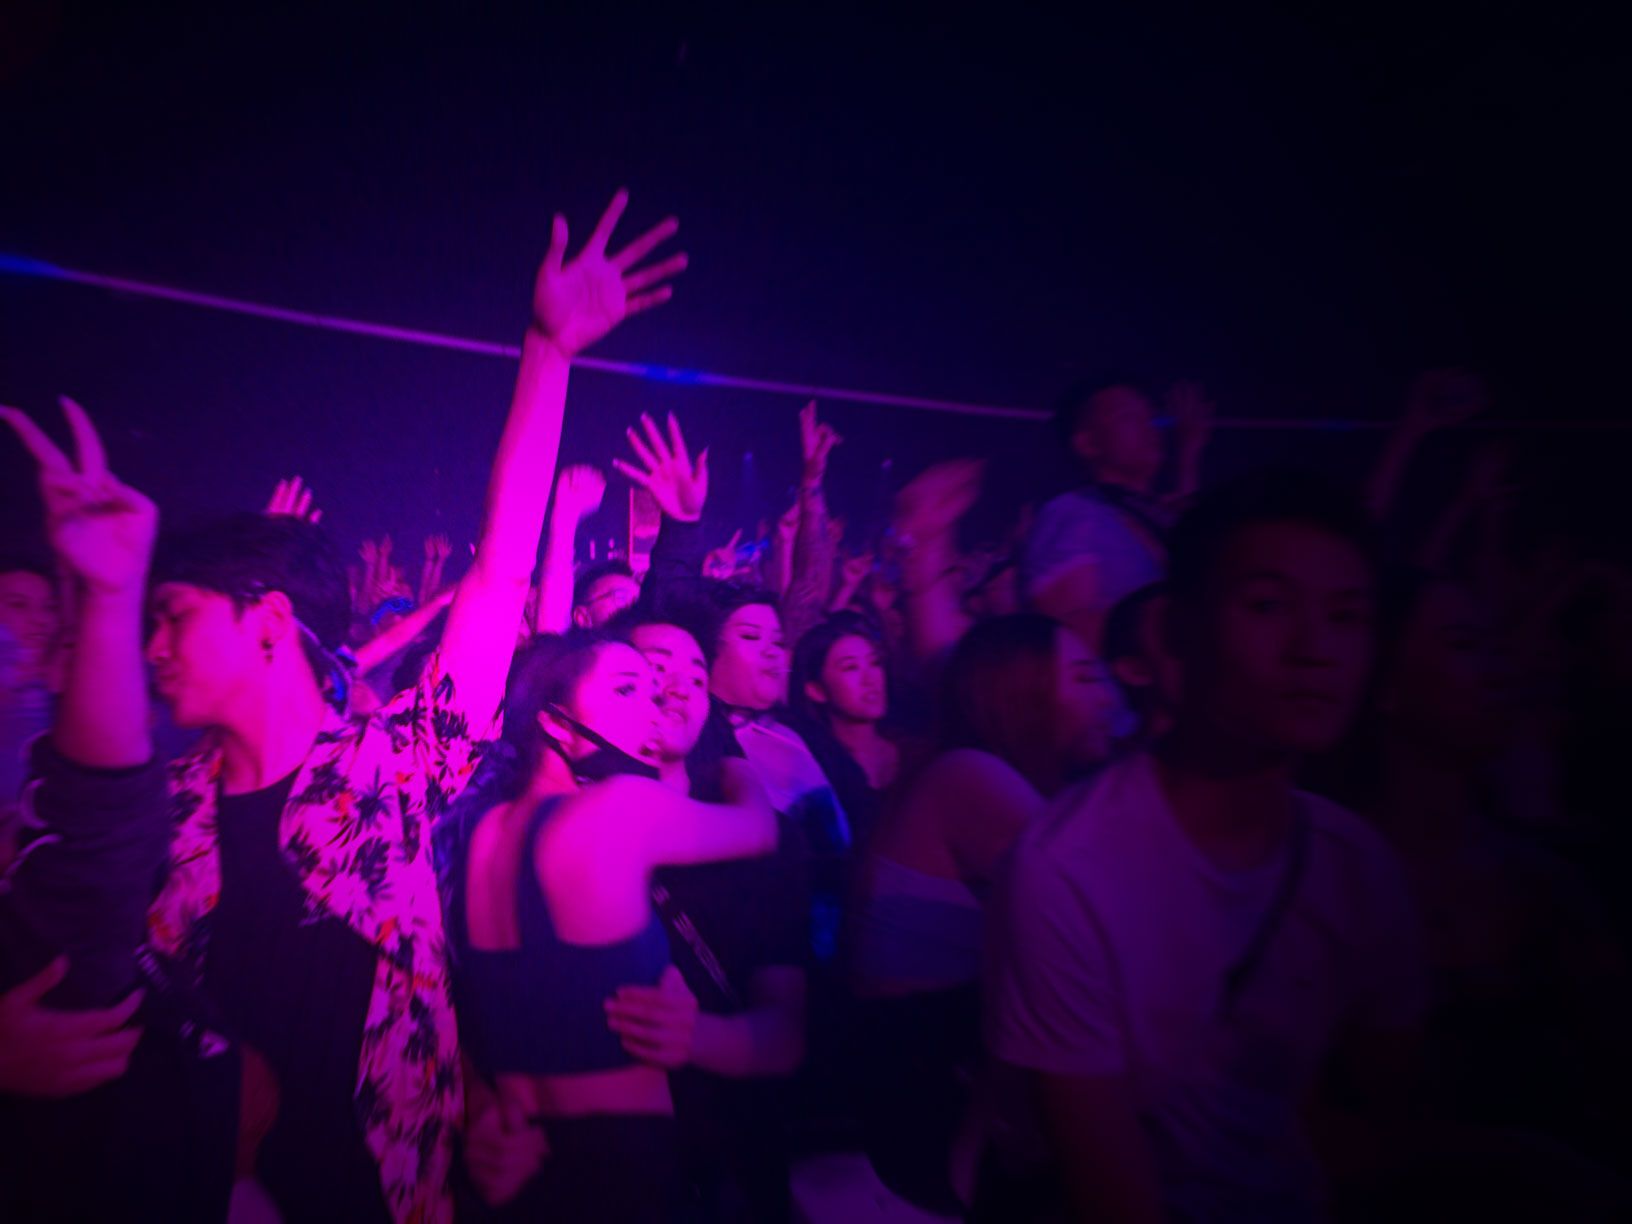 Raving Asians Make the Bass Drop: The New Rave Culture